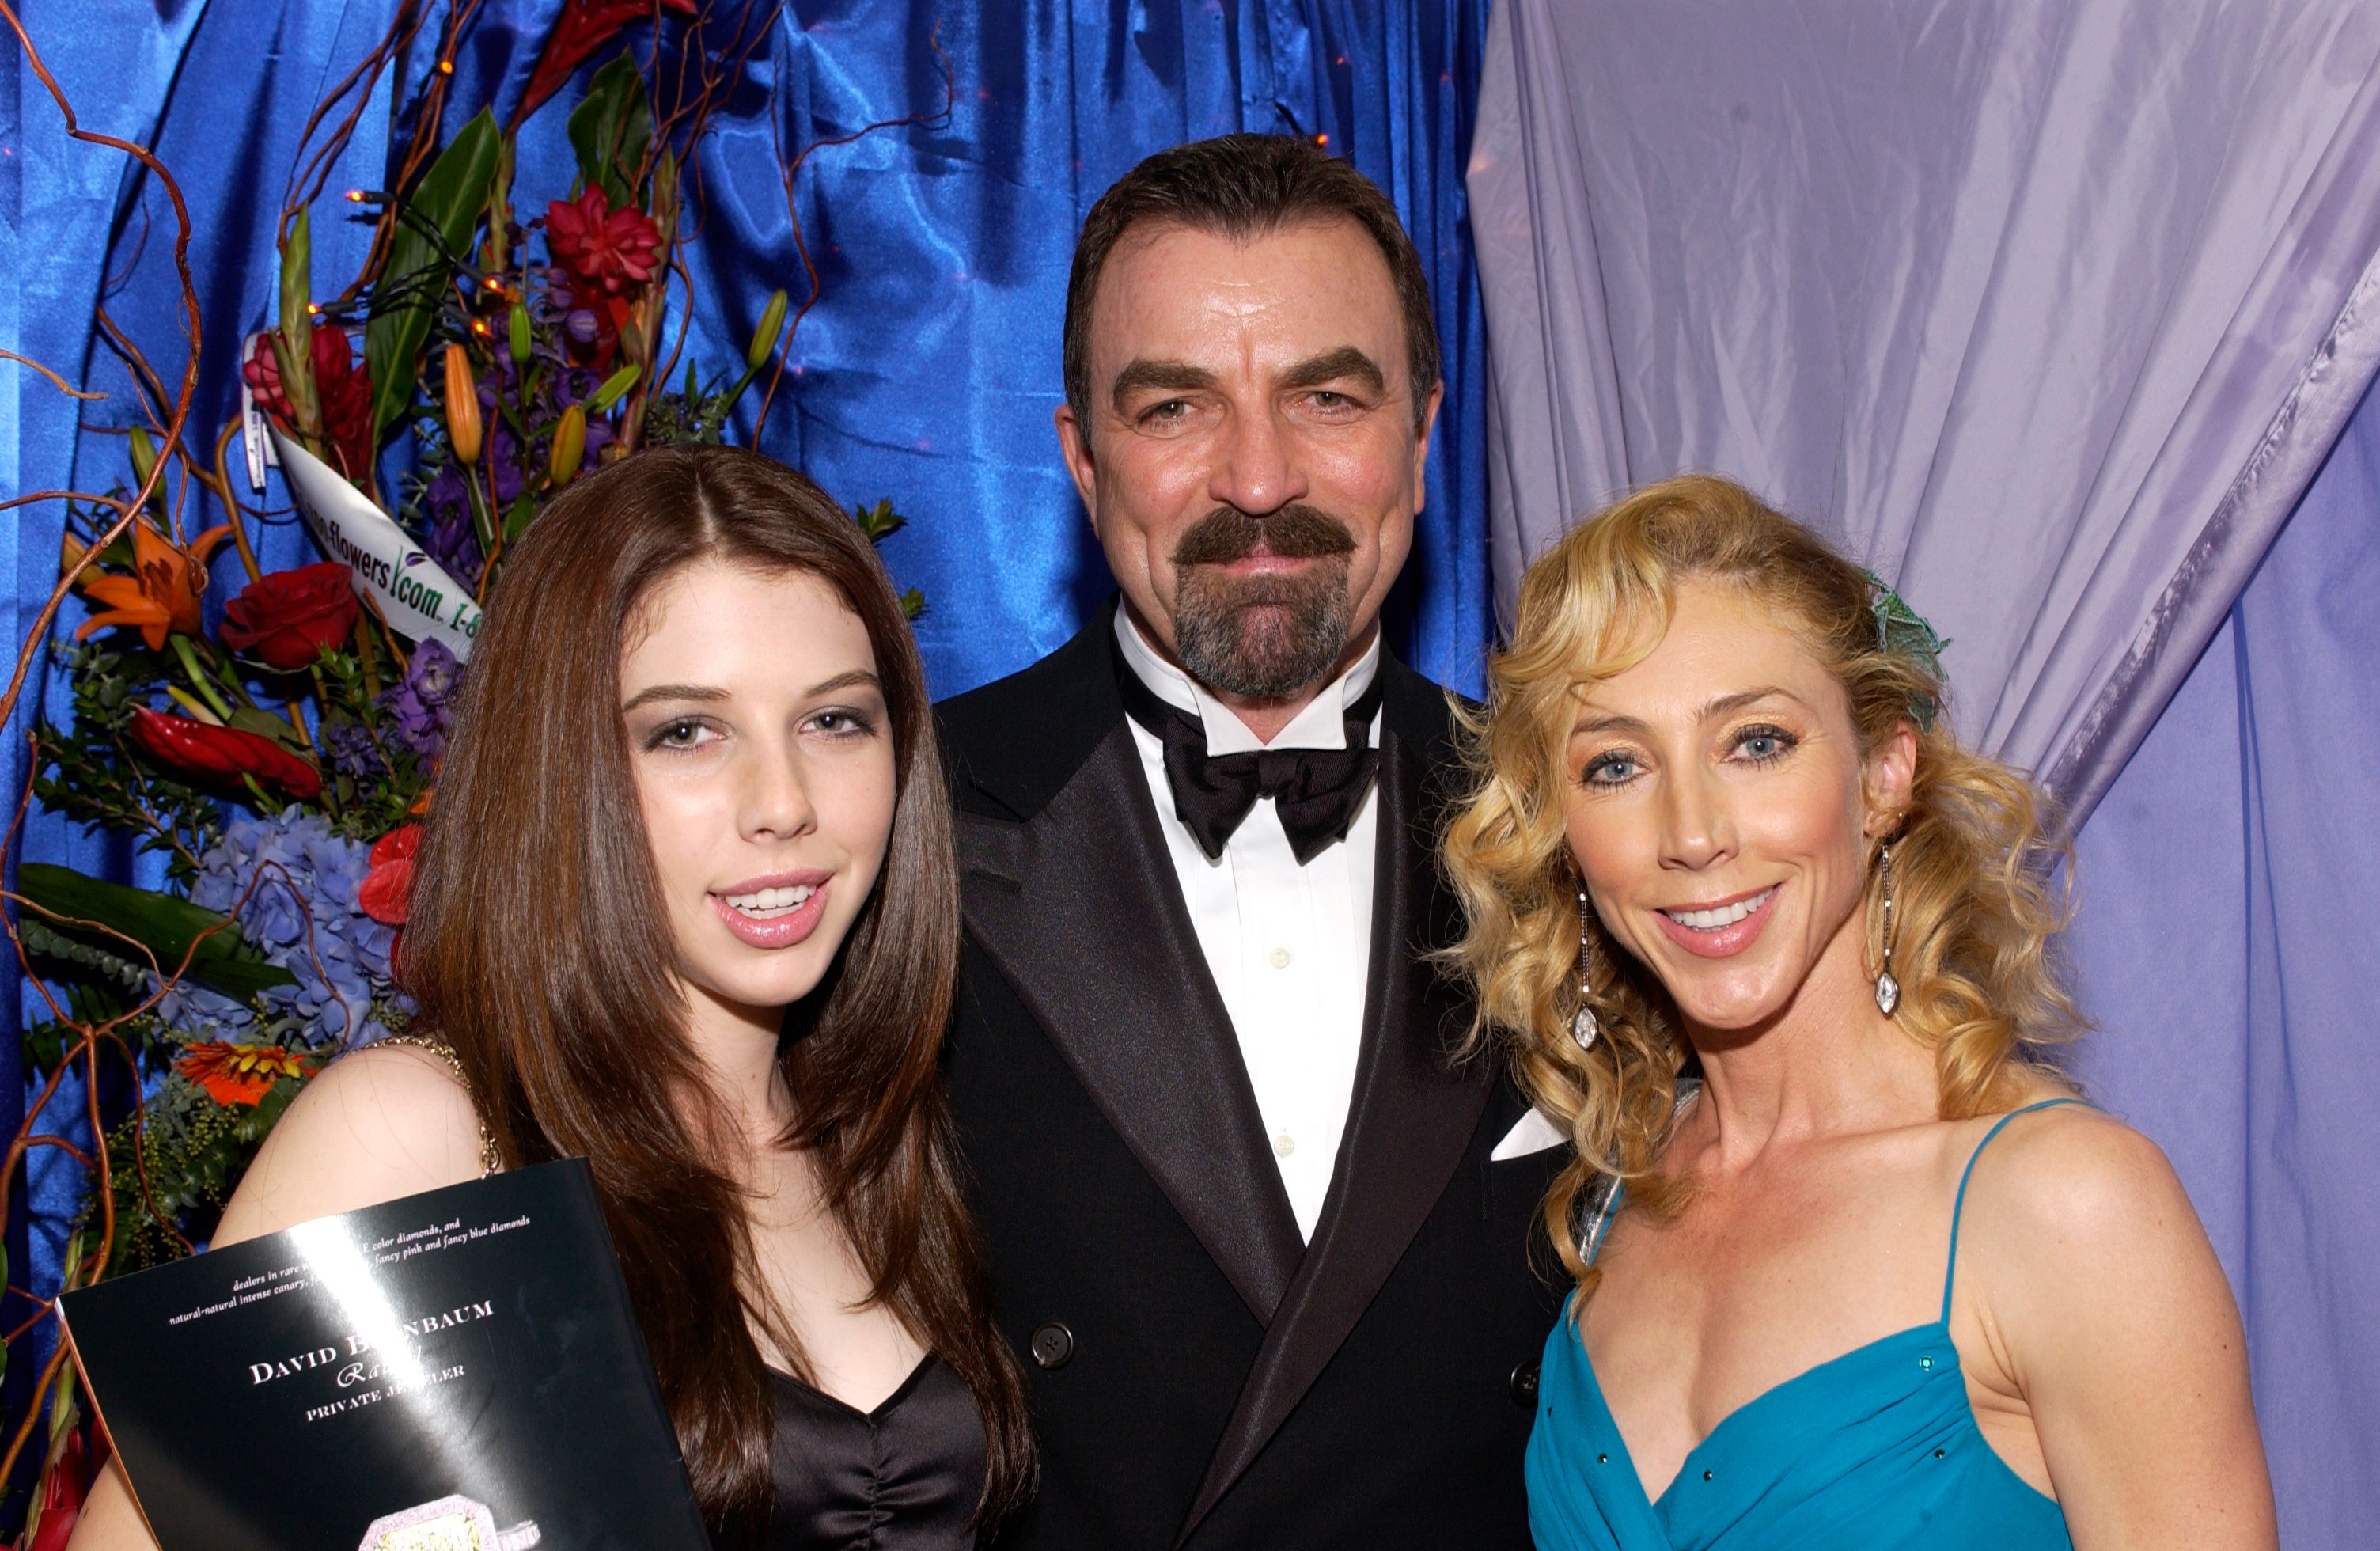 Tom Selleck, daugher Hannah and wife Jillie Mack at the Distinctive Assets Gift Lounge during the People?s Choice Awards on January 9, 2005. | Source: Getty Images